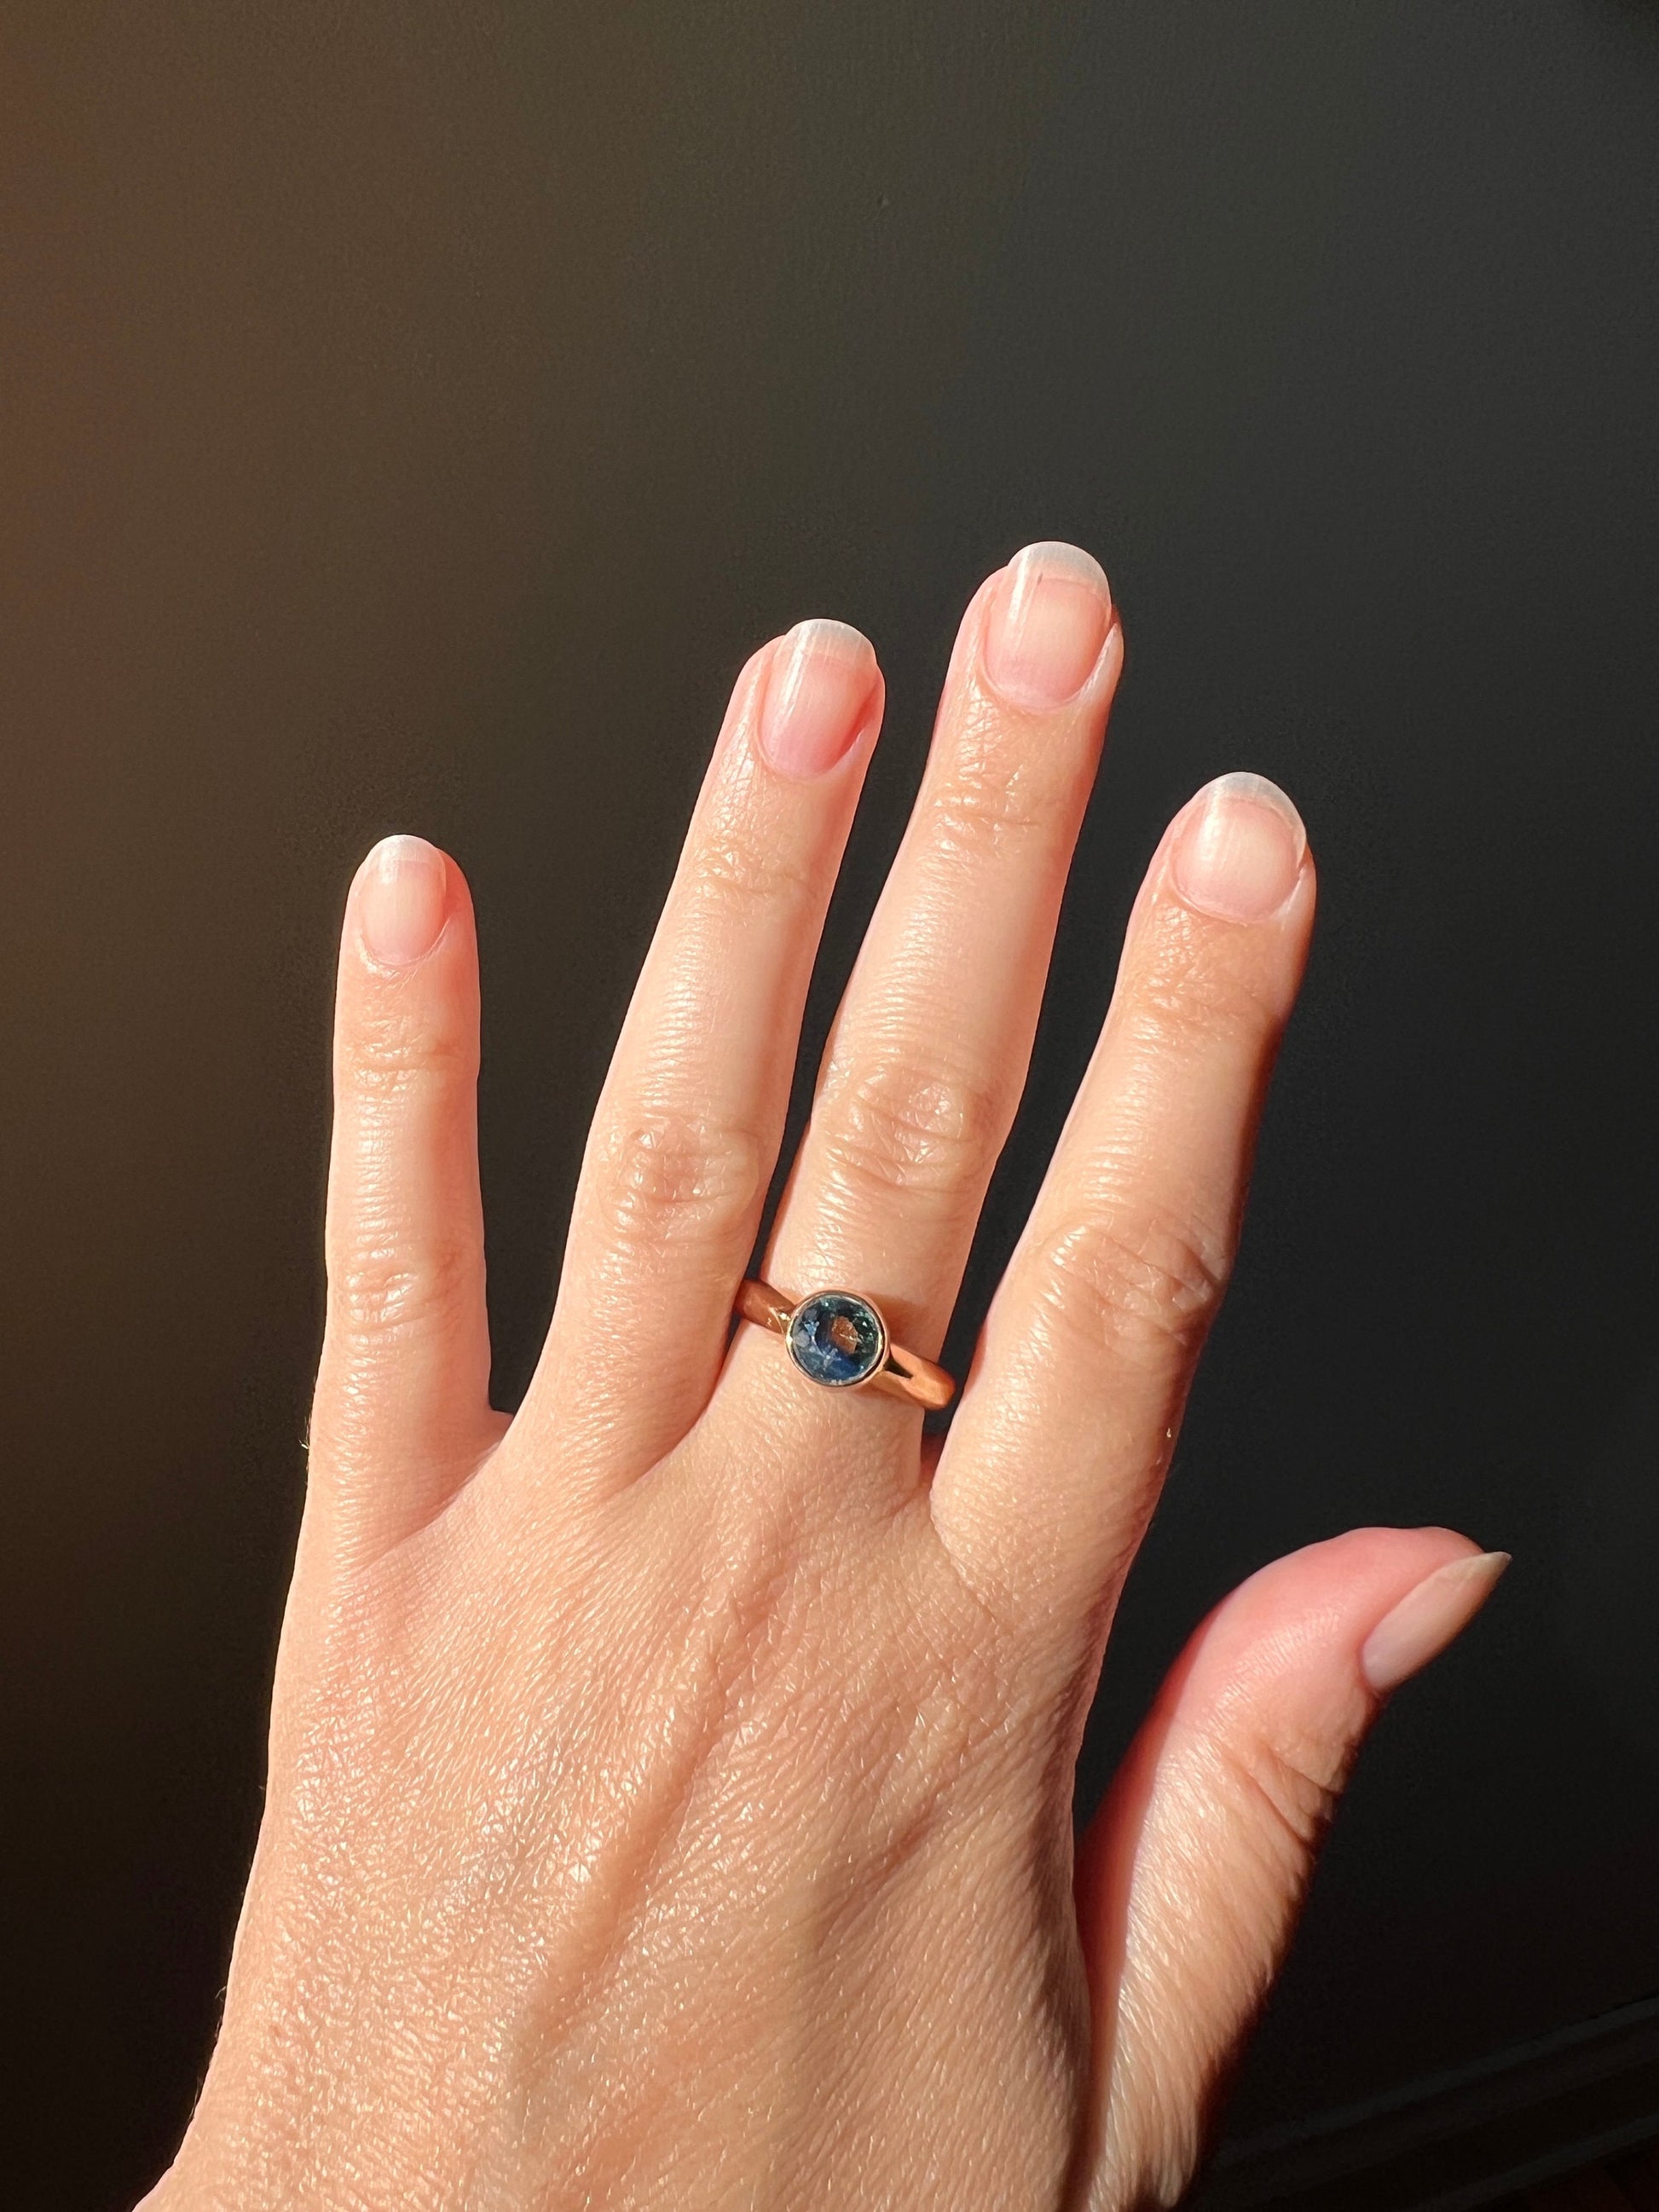 The 50/50 GREEN Half BLUE Natural Old Cut Sapphire Ring Victorian Antique 15k Rose Gold Ring Solitaire Alt Engagement Bi Color Gift OMC 14k